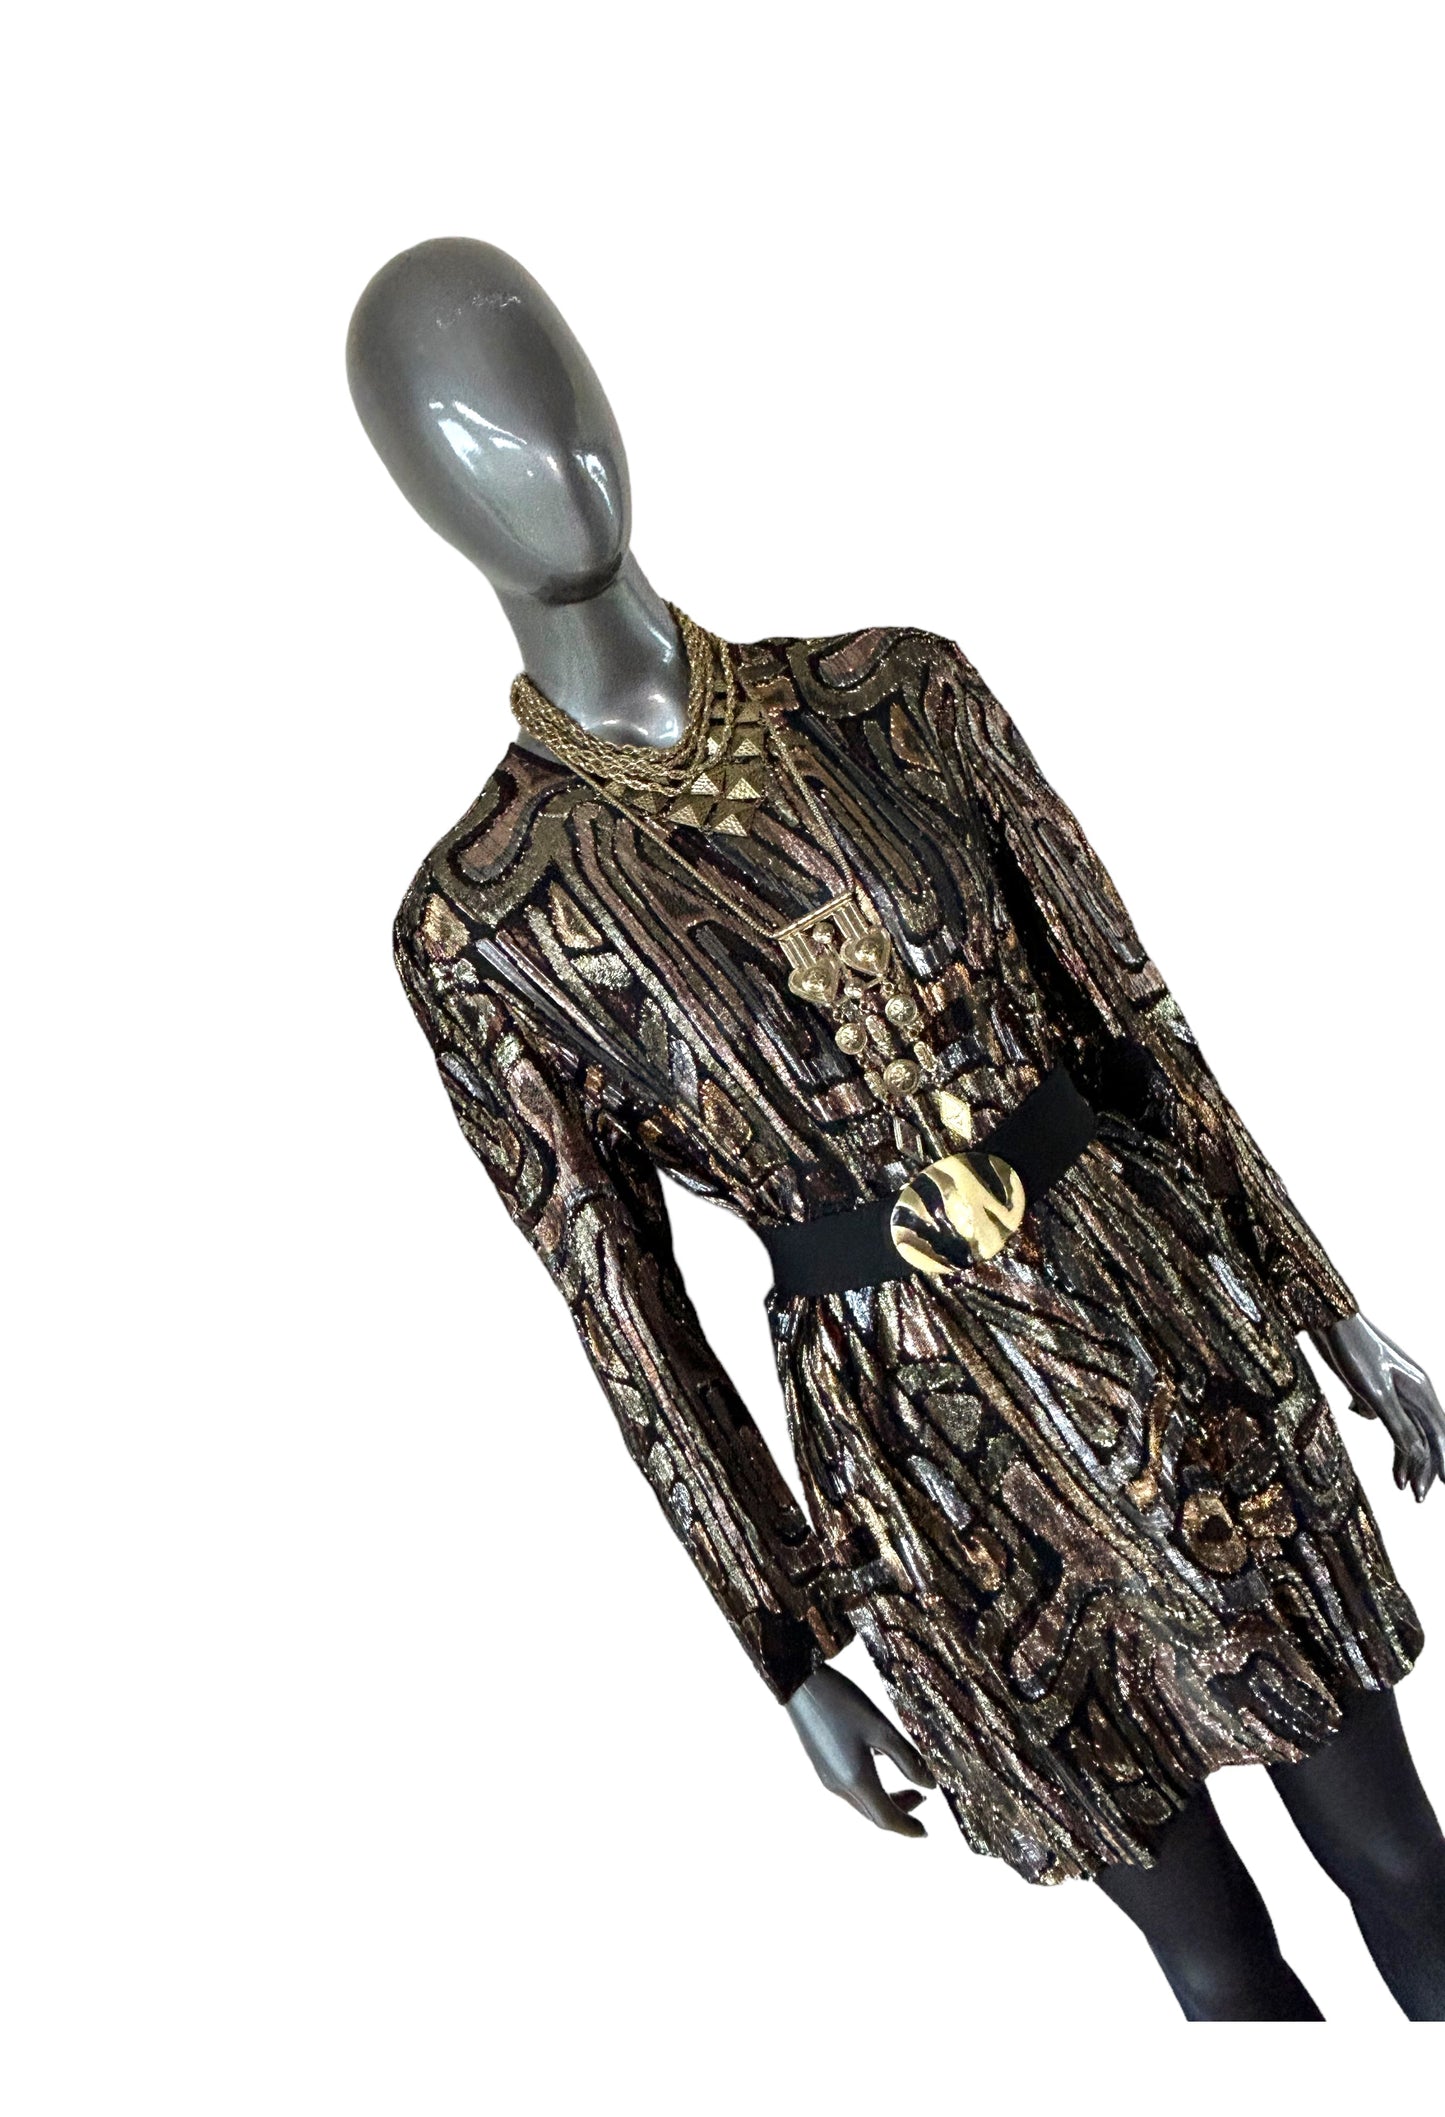 1980s French Lame Metallic Tunic Dress in hues of Gold, Silver and Bronze